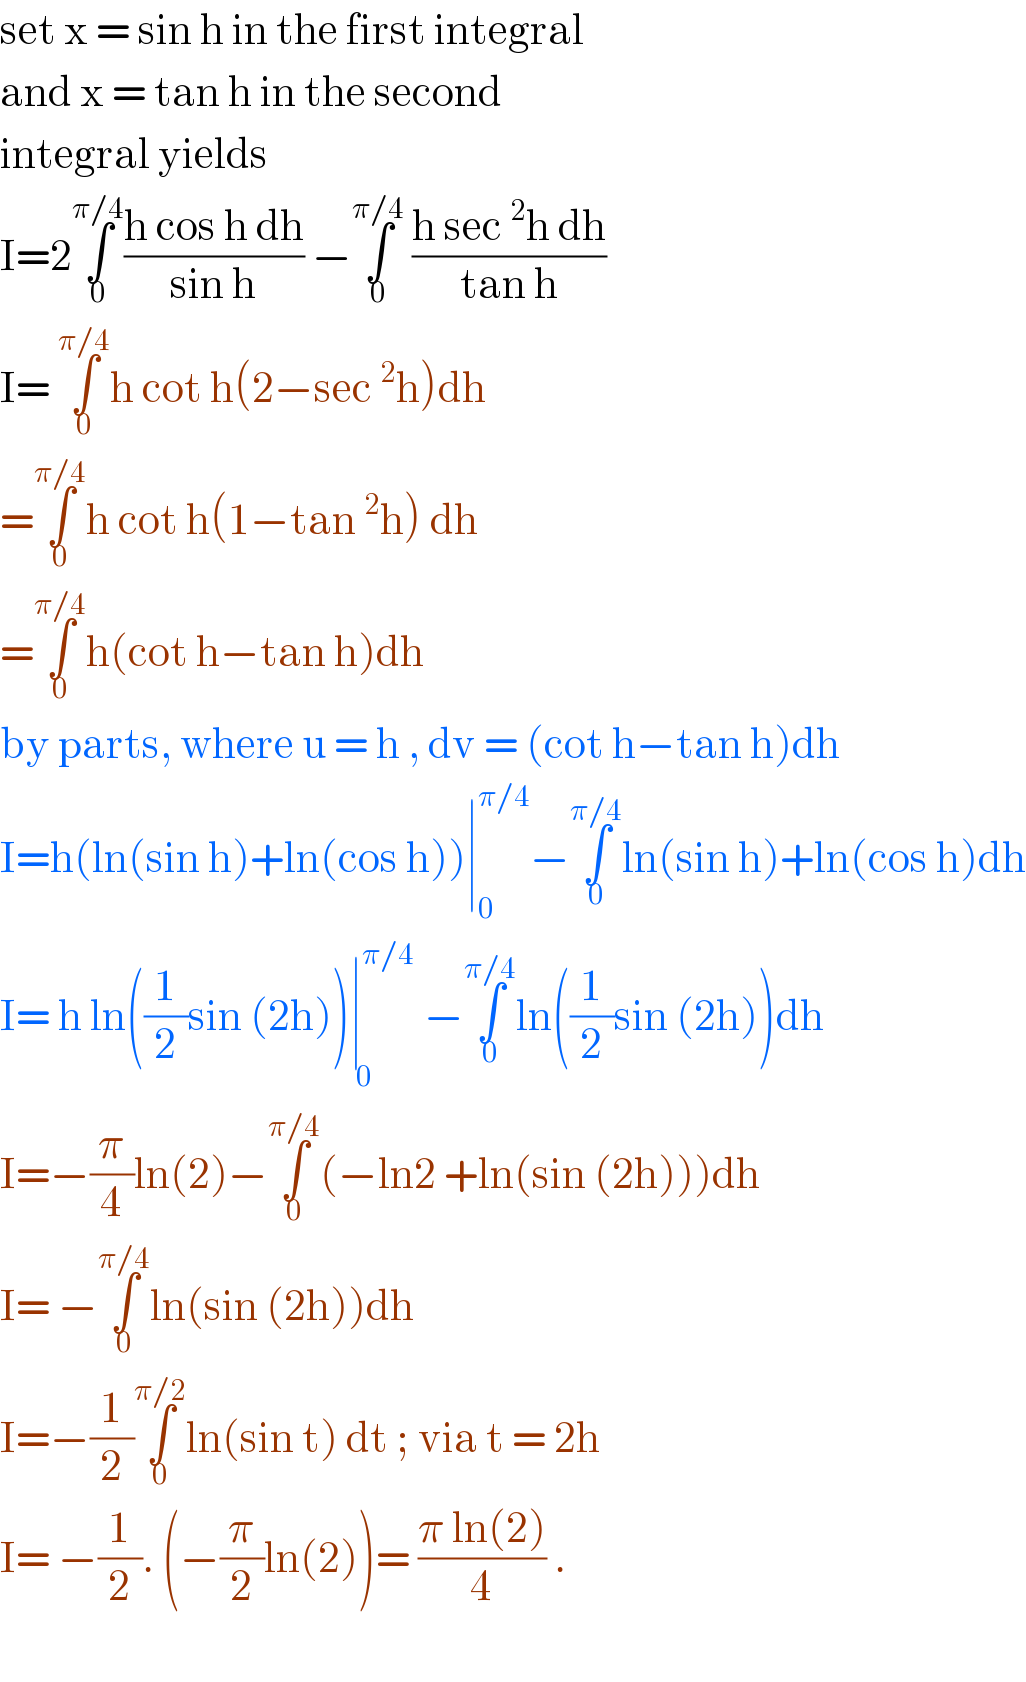 set x = sin h in the first integral  and x = tan h in the second  integral yields   I=2∫_0 ^(π/4) ((h cos h dh)/(sin h)) −∫_0 ^(π/4)  ((h sec ^2 h dh)/(tan h))  I= ∫_0 ^(π/4) h cot h(2−sec ^2 h)dh  =∫_0 ^(π/4) h cot h(1−tan ^2 h) dh   =∫_0 ^(π/4) h(cot h−tan h)dh   by parts, where u = h , dv = (cot h−tan h)dh  I=h(ln(sin h)+ln(cos h))∣_0 ^(π/4) −∫_0 ^(π/4) ln(sin h)+ln(cos h)dh  I= h ln((1/2)sin (2h))∣^(π/4) _( 0) −∫_0 ^(π/4) ln((1/2)sin (2h))dh  I=−(π/4)ln(2)−∫_0 ^(π/4) (−ln2 +ln(sin (2h)))dh  I= −∫_0 ^(π/4) ln(sin (2h))dh  I=−(1/2)∫_0 ^(π/2) ln(sin t) dt ; via t = 2h  I= −(1/2). (−(π/2)ln(2))= ((π ln(2))/4) .    